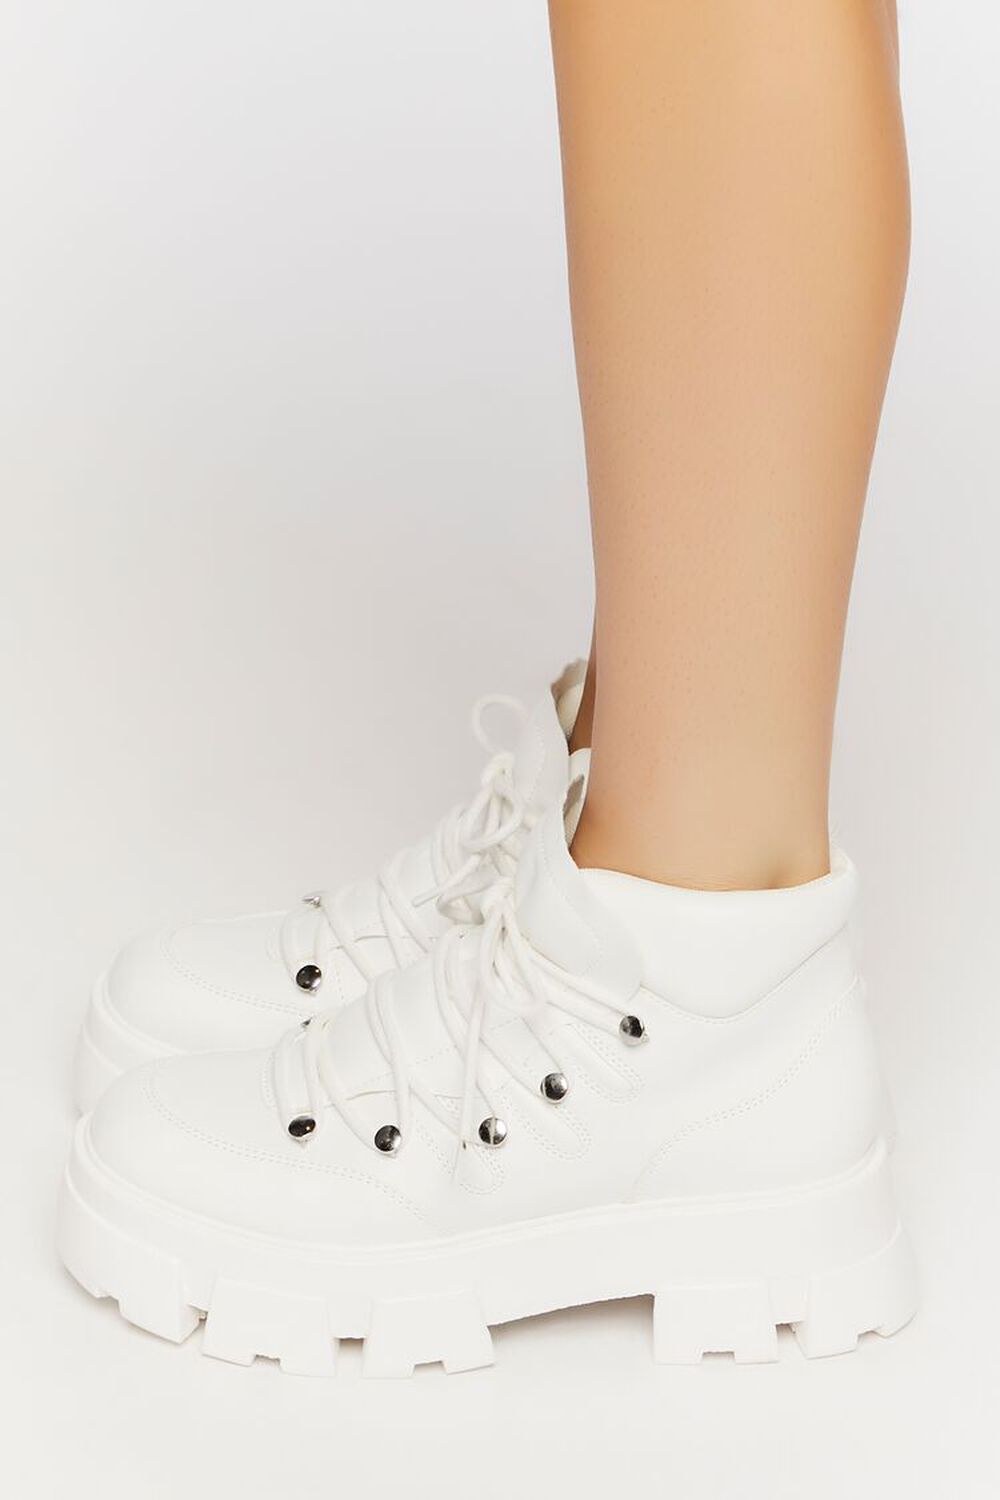 WHITE Lace-Up Lug Sole Ankle Booties, image 2